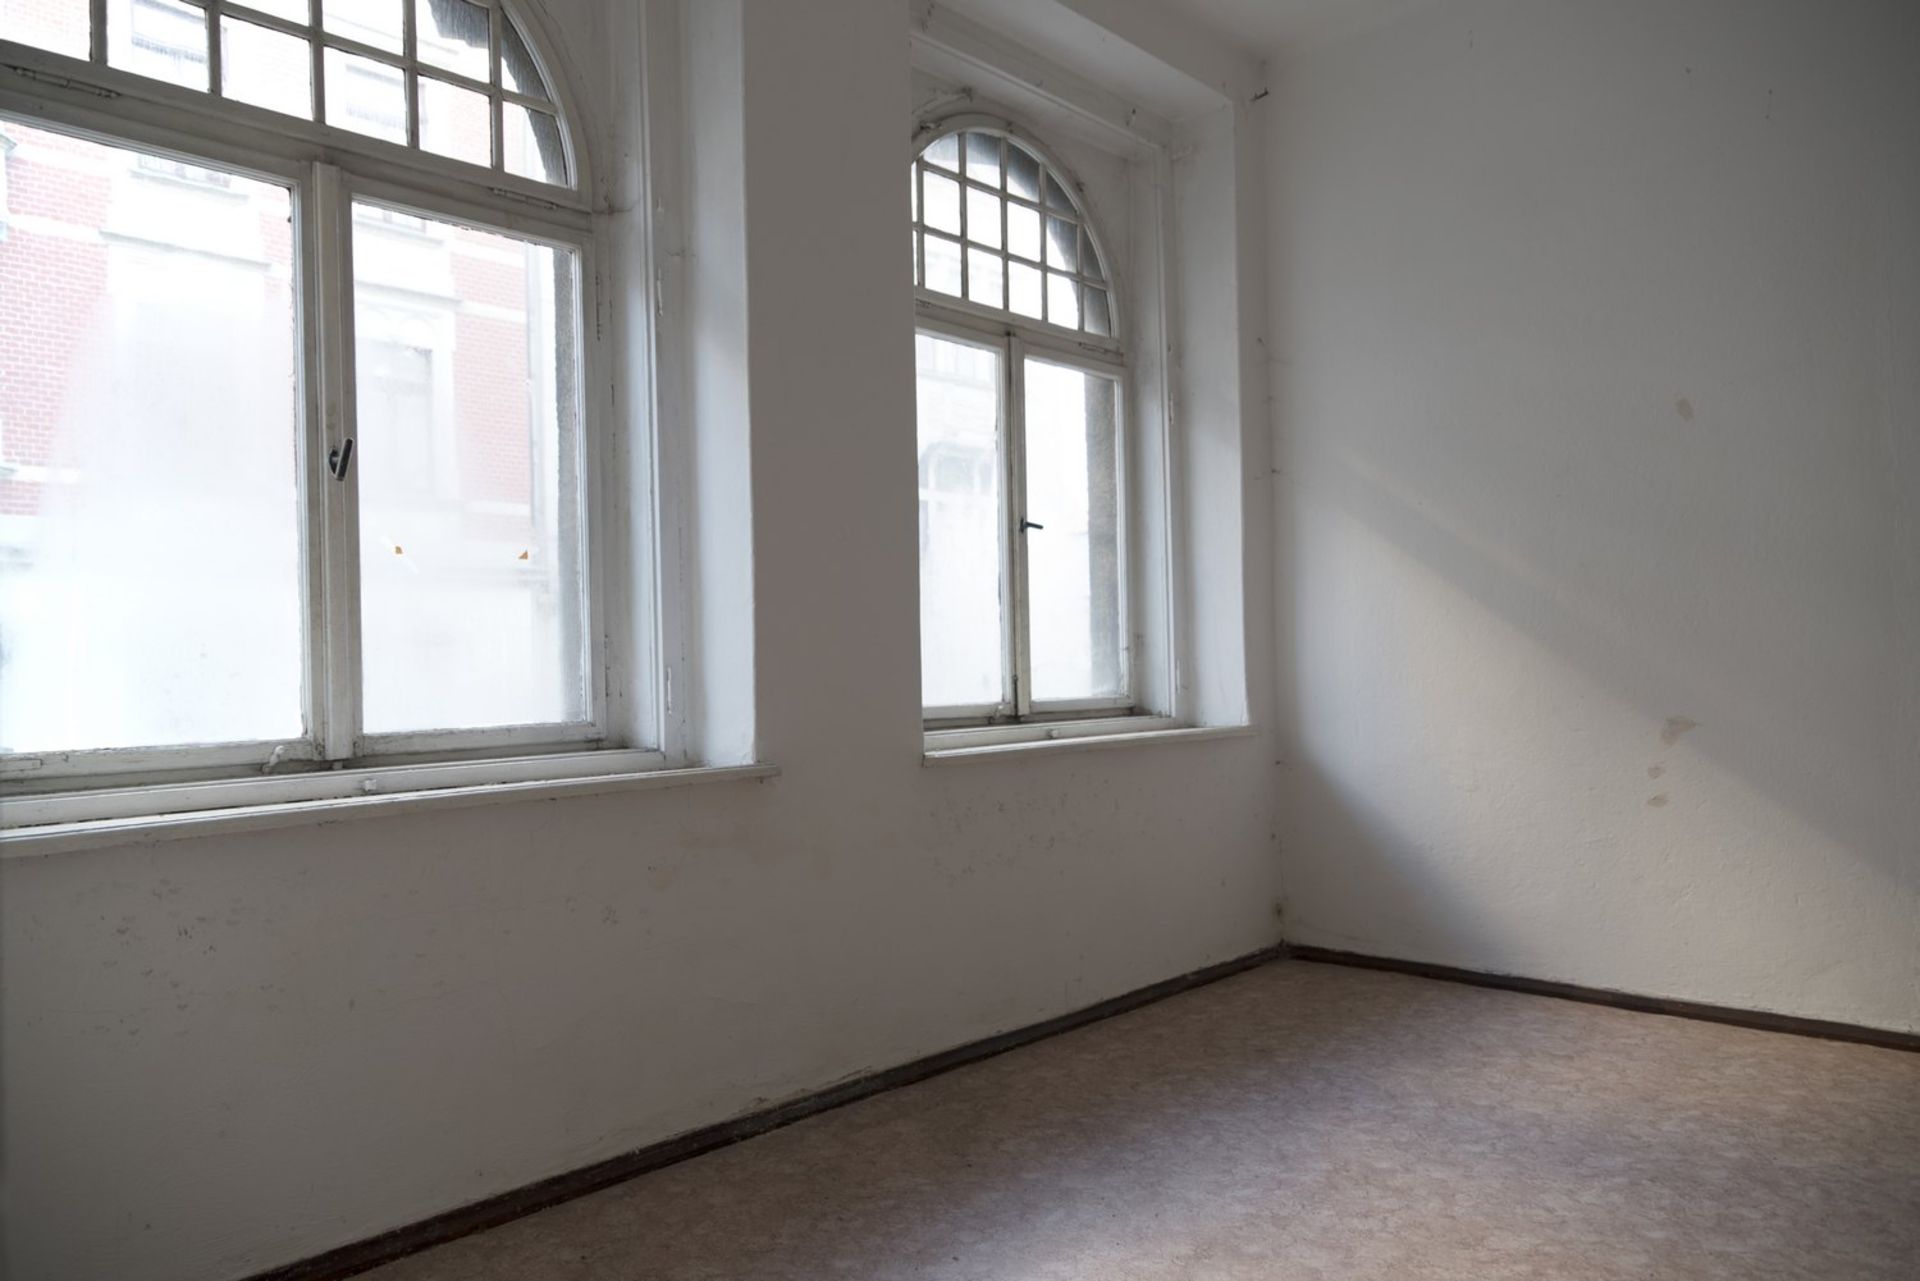 4 STOREY GERMANY APARTMENT BLOCK IN ADDITION TO A FULL BASEMENT + HUGE ATTIC! - Image 14 of 76